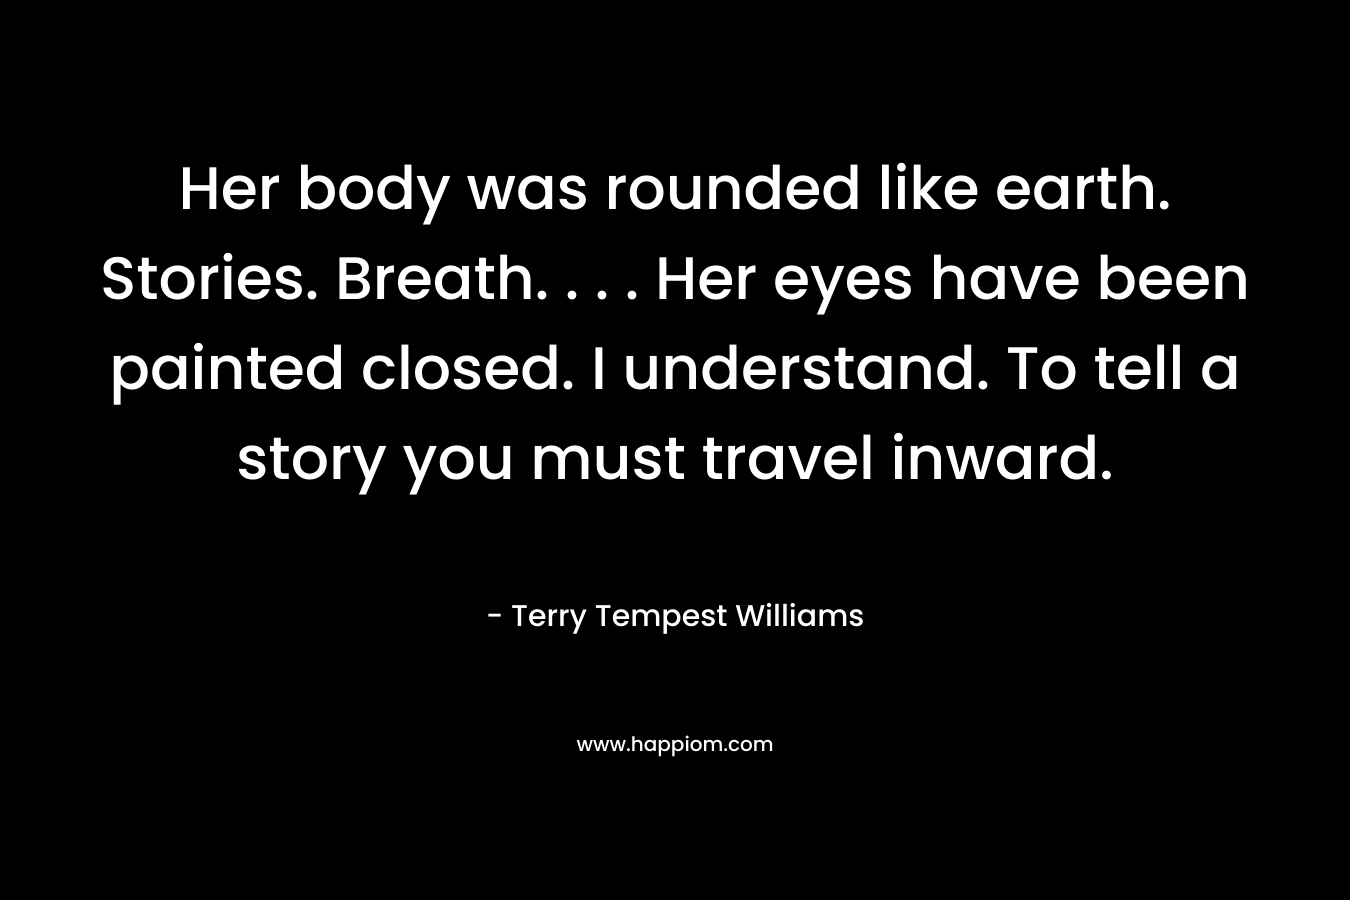 Her body was rounded like earth. Stories. Breath. . . . Her eyes have been painted closed. I understand. To tell a story you must travel inward. – Terry Tempest Williams